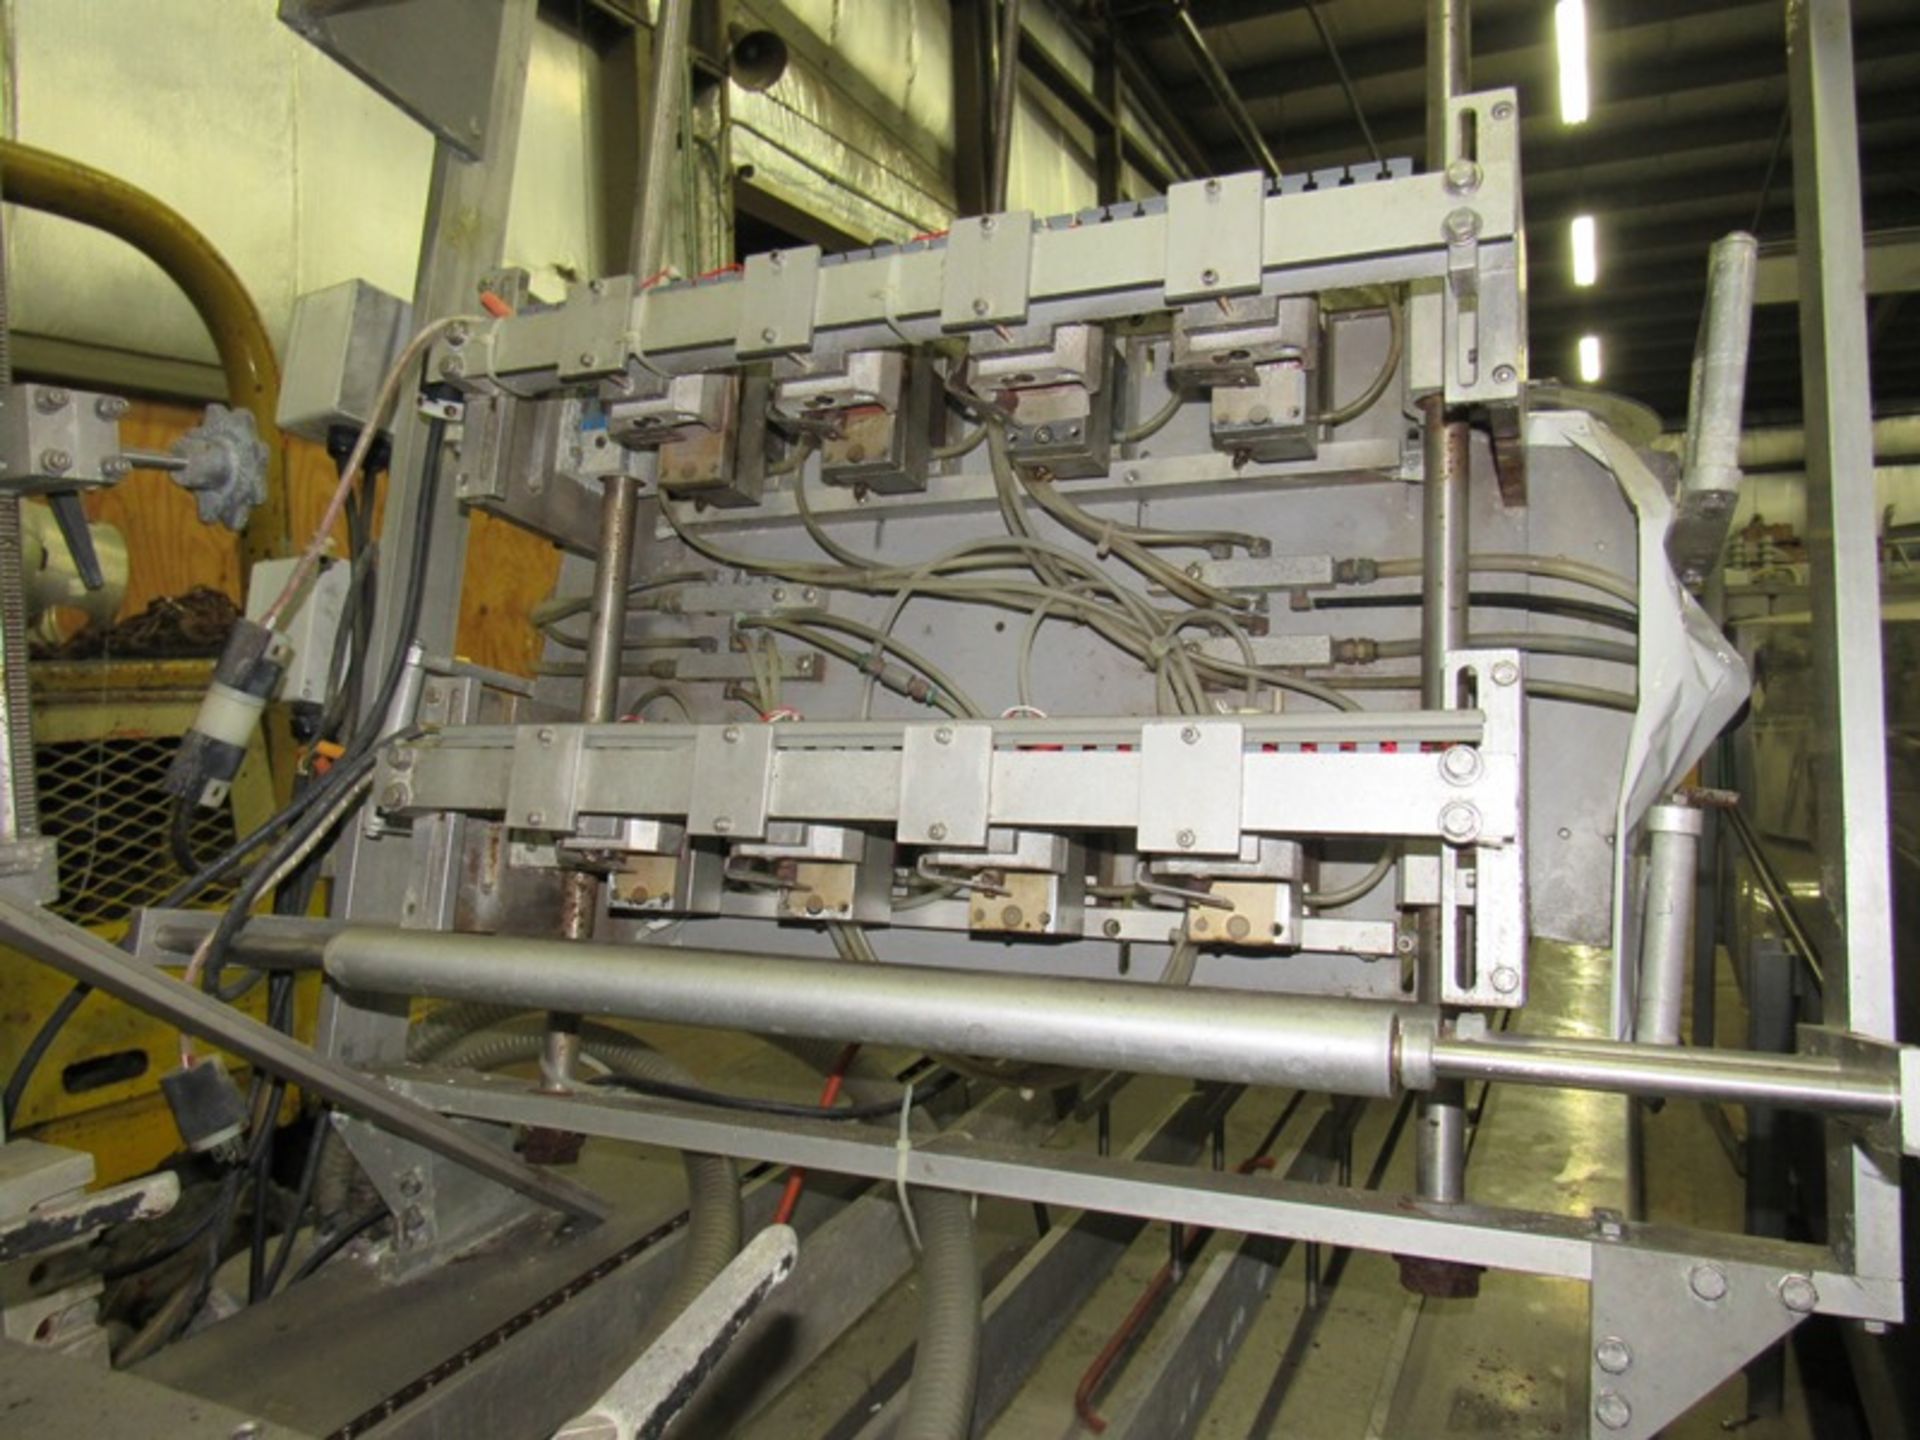 Kramer Grebe Rollstock Packager, 560 mm between chains, 16 up die, approx.: 120 mm wide X 150 mm - Image 11 of 19